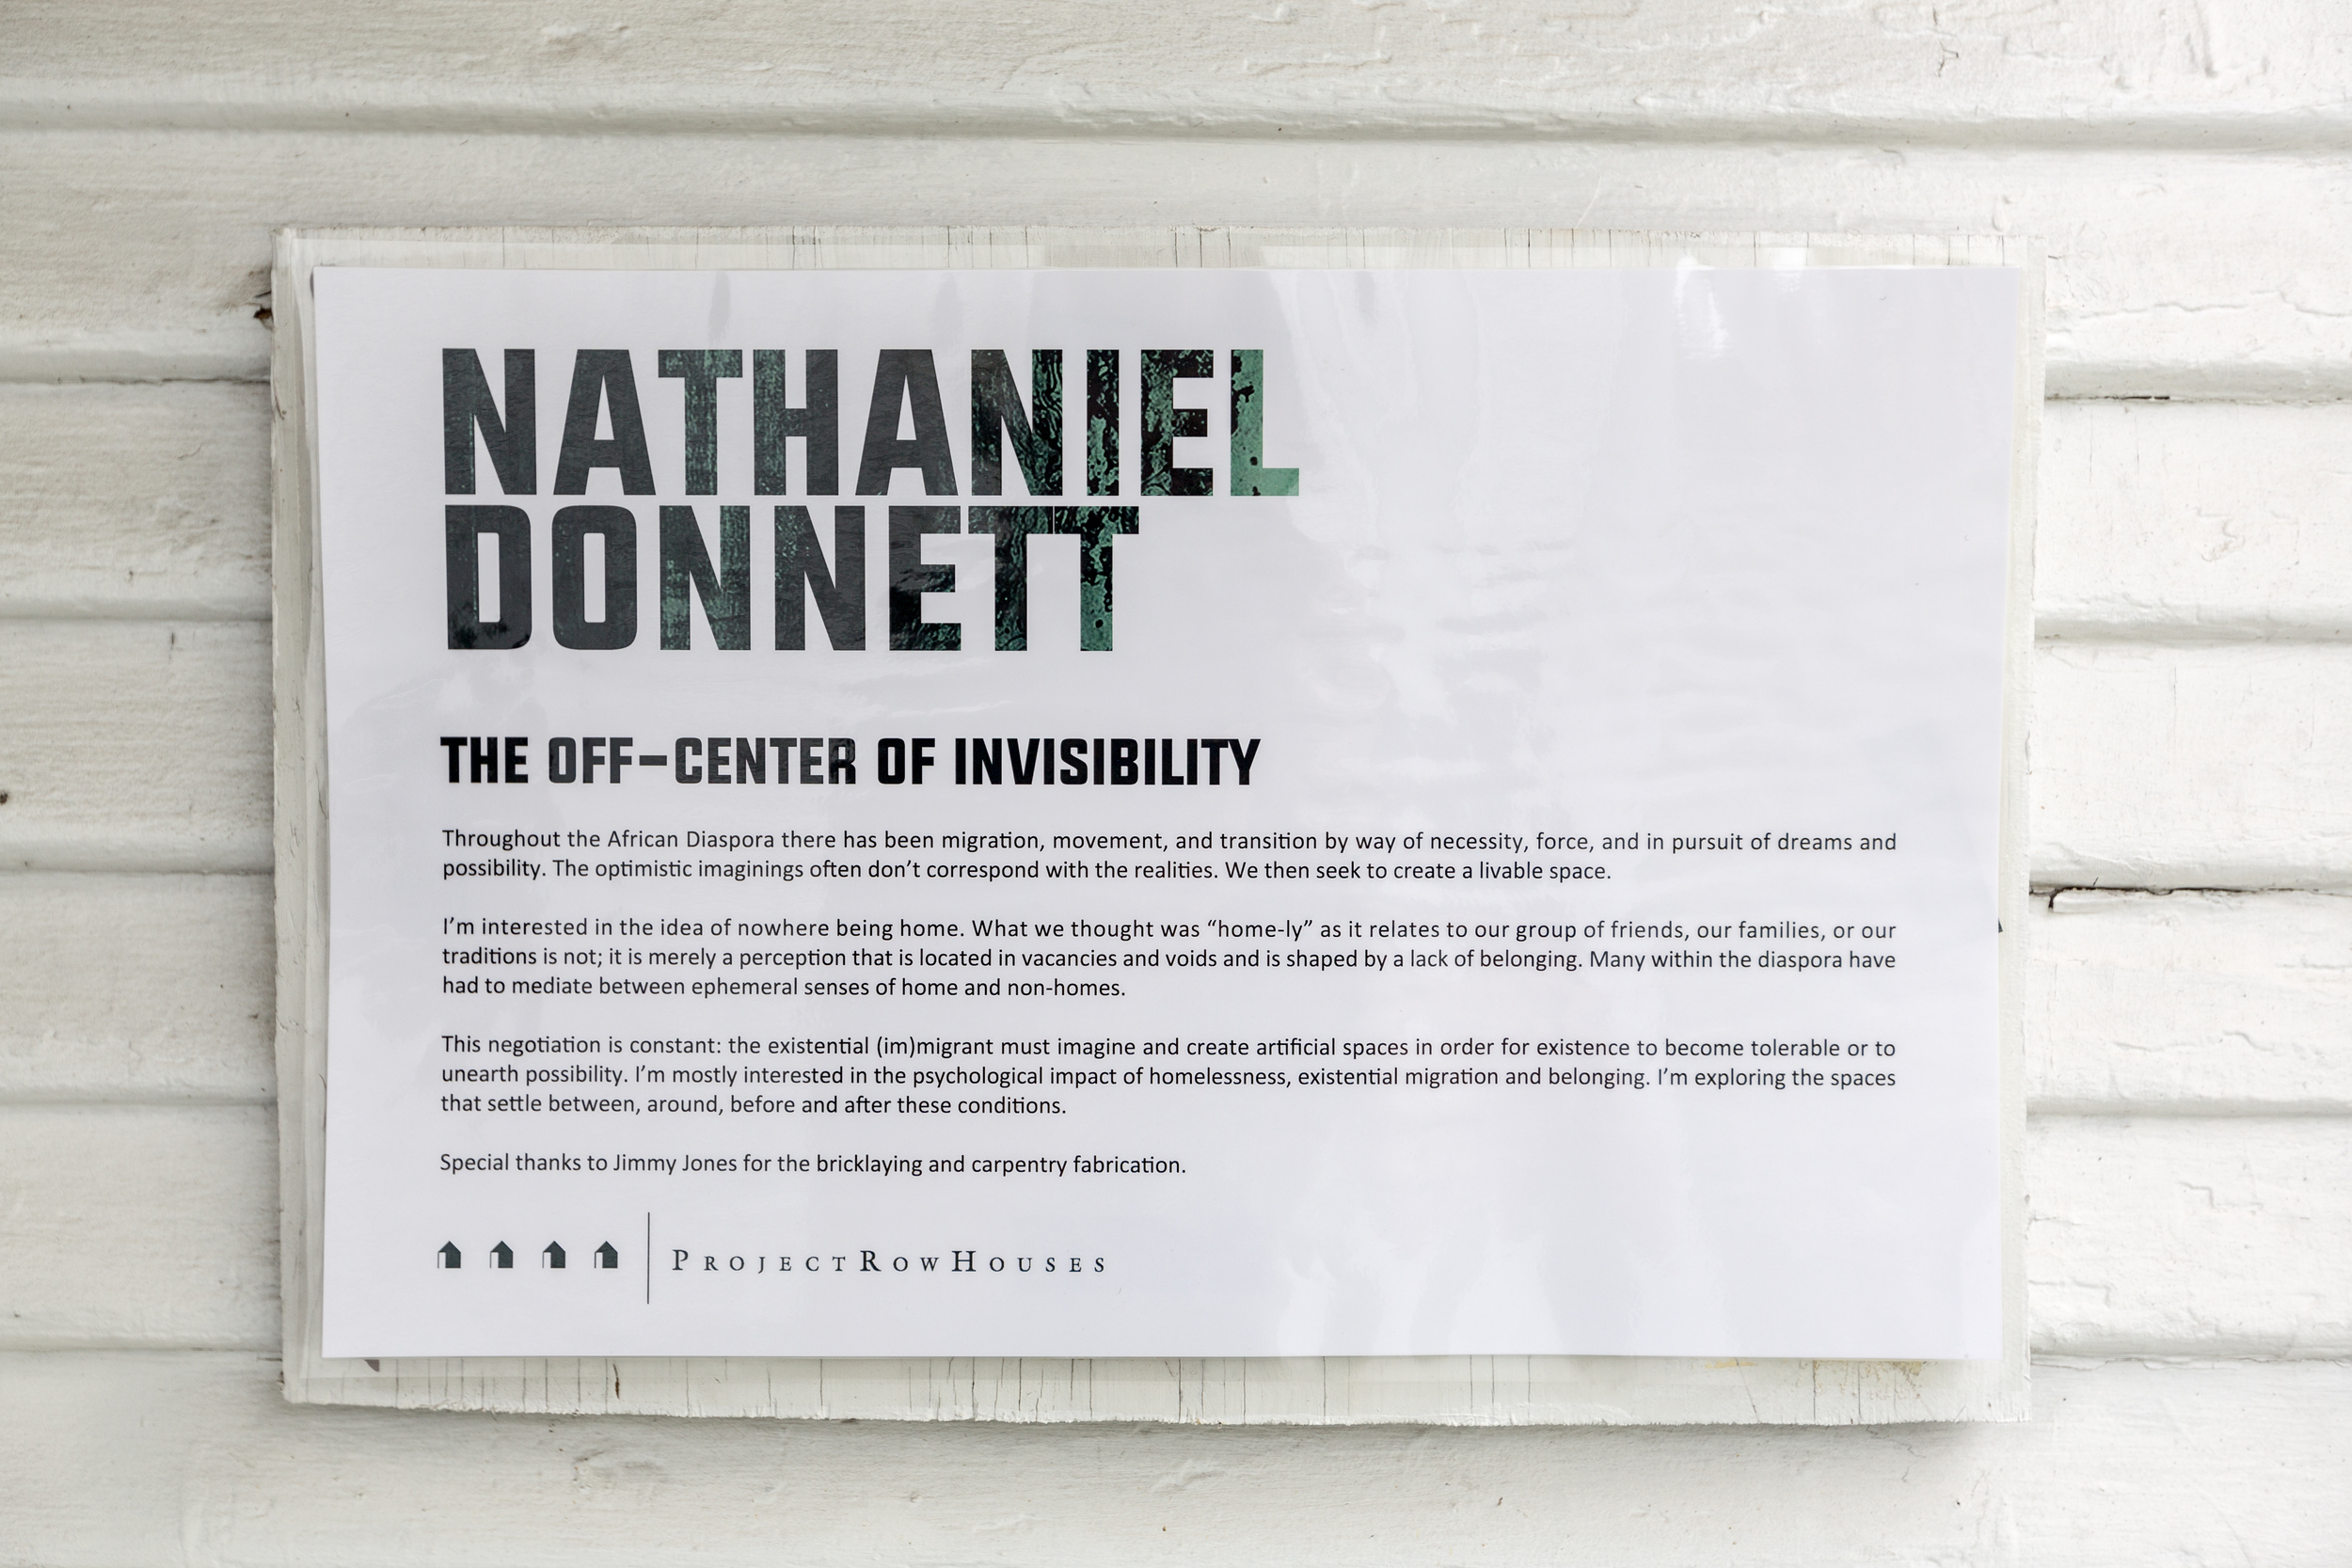  Nathaniel Donnett, the off-center of invisibility 